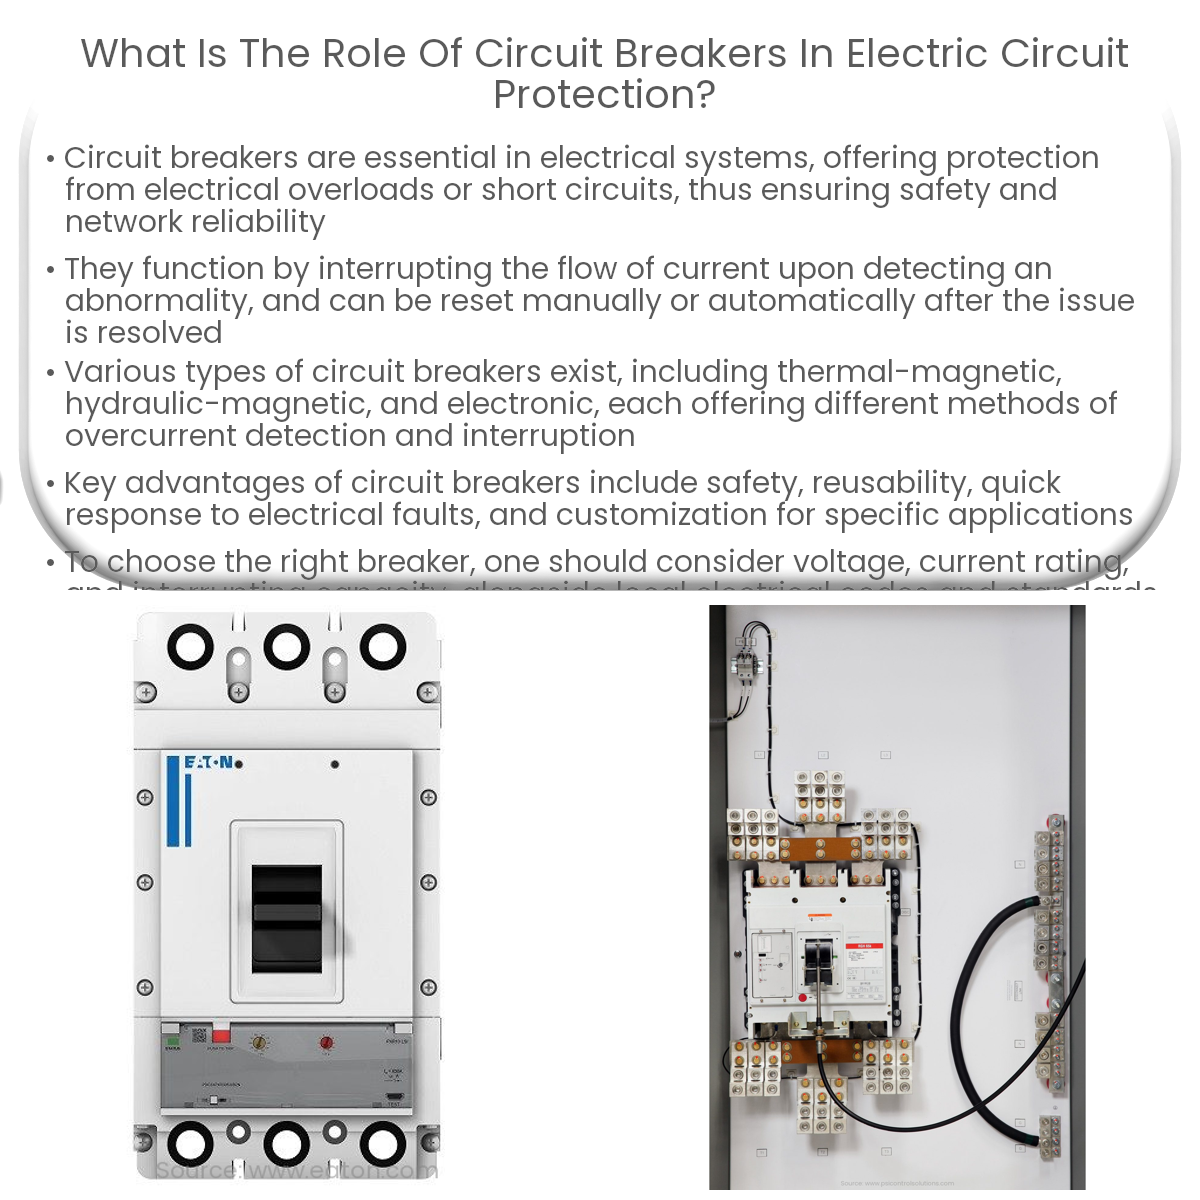 What is the role of circuit breakers in electric circuit protection?